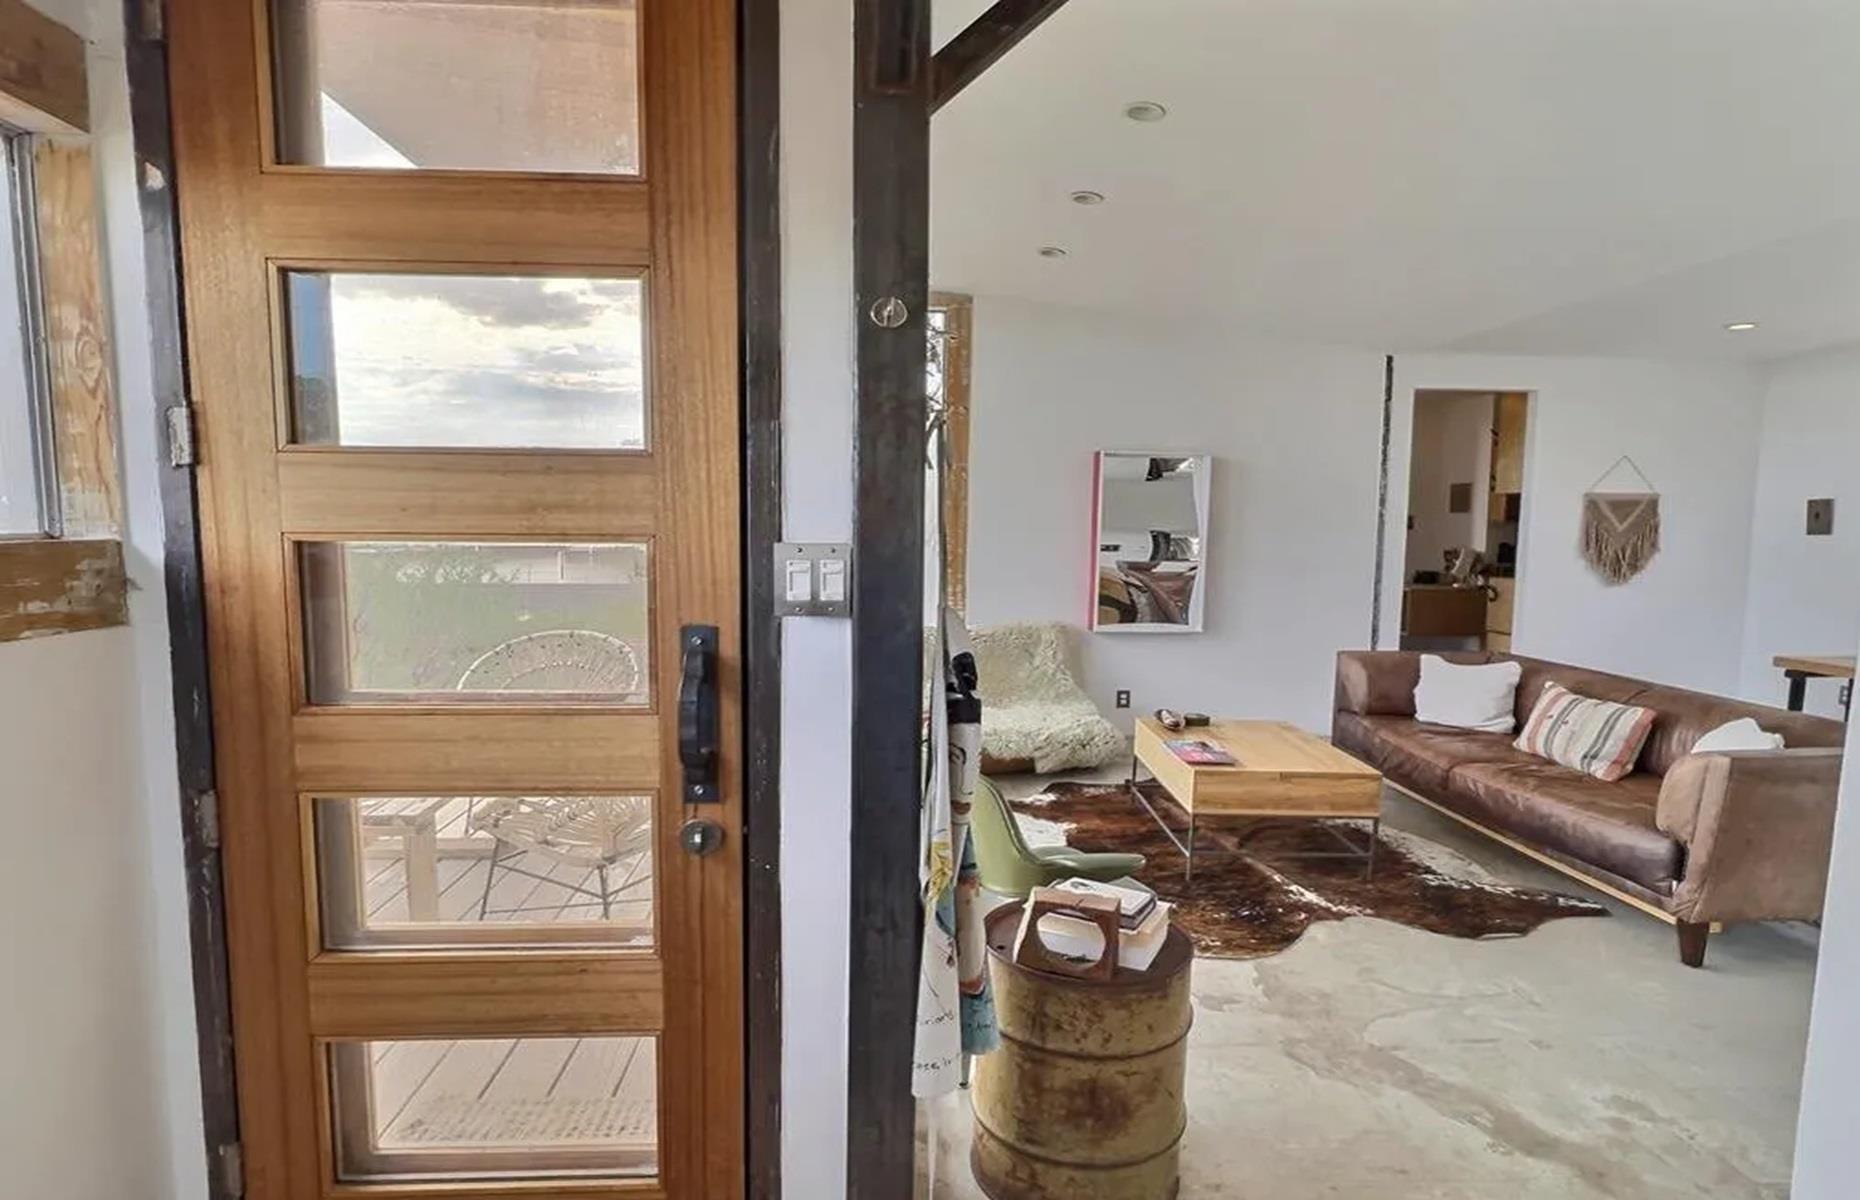 <p>Built in 2015, <a href="https://www.realtor.com/news/unique-homes/2-shipping-container-home-in-marfa-tx-asks-525k/">the property</a> blends both modern design and rustic charm. It's also surprisingly spacious, with 933 square feet of living space. There's an open-plan lounge, dining space, and kitchen, as well as two bedrooms, two bathrooms and two exterior decks for soaking up the scenery.</p>